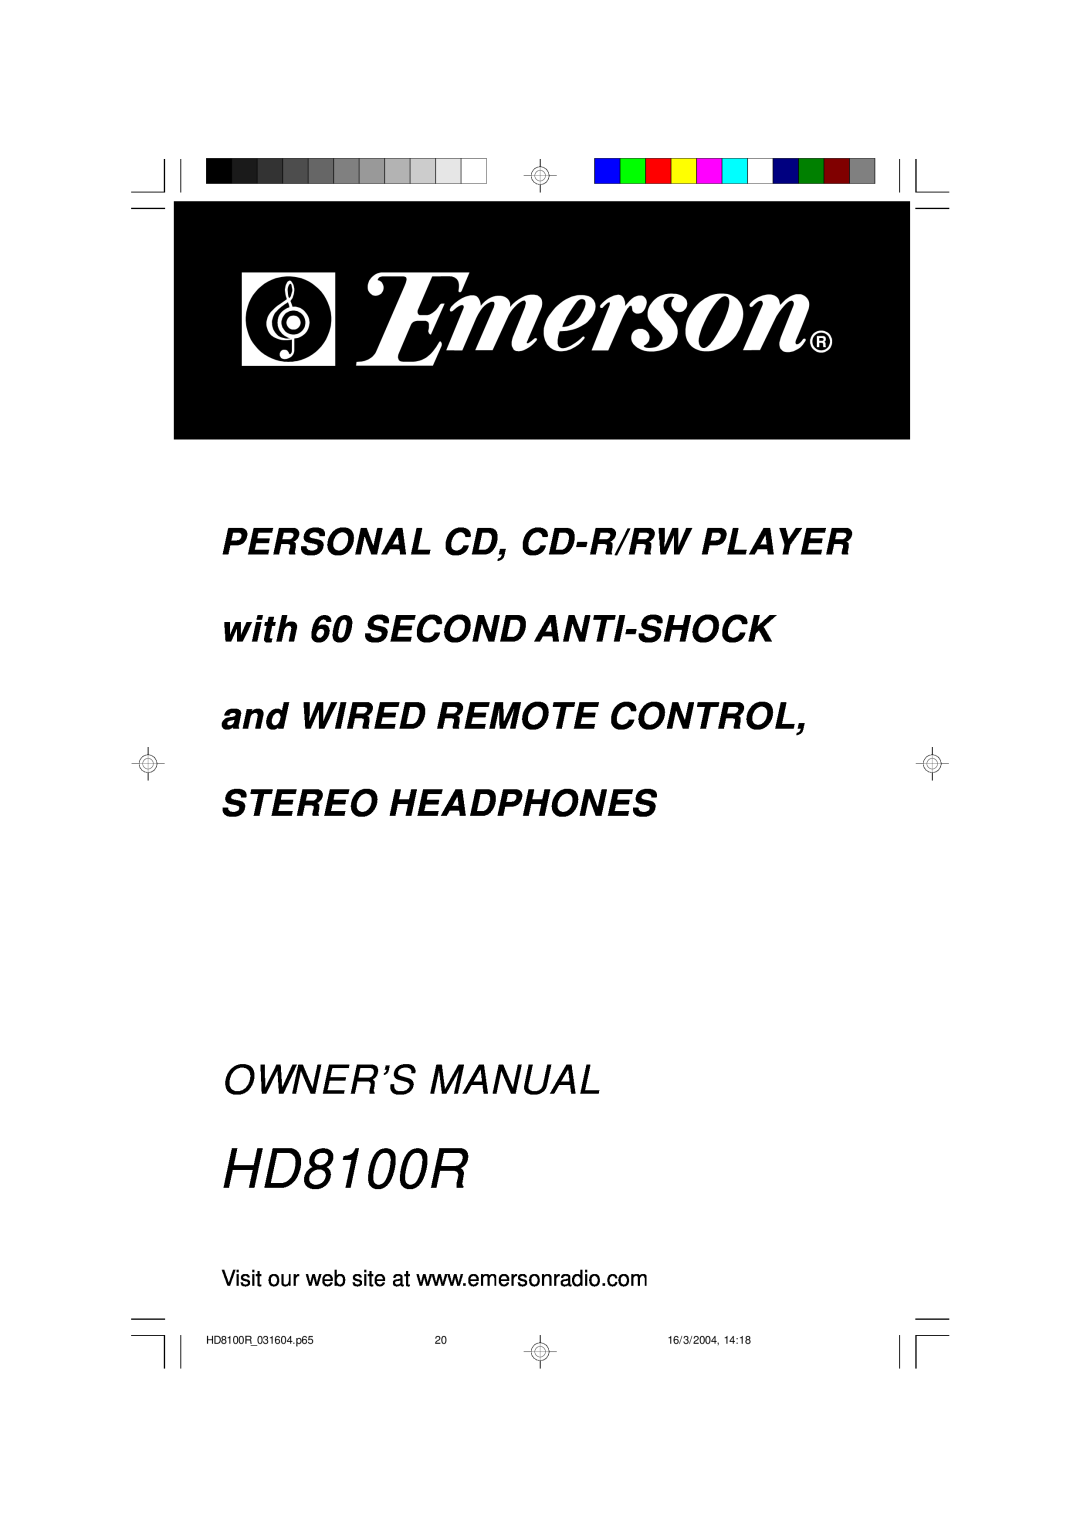 Emerson owner manual HD8100R 031604.p65, 16/3/2004 